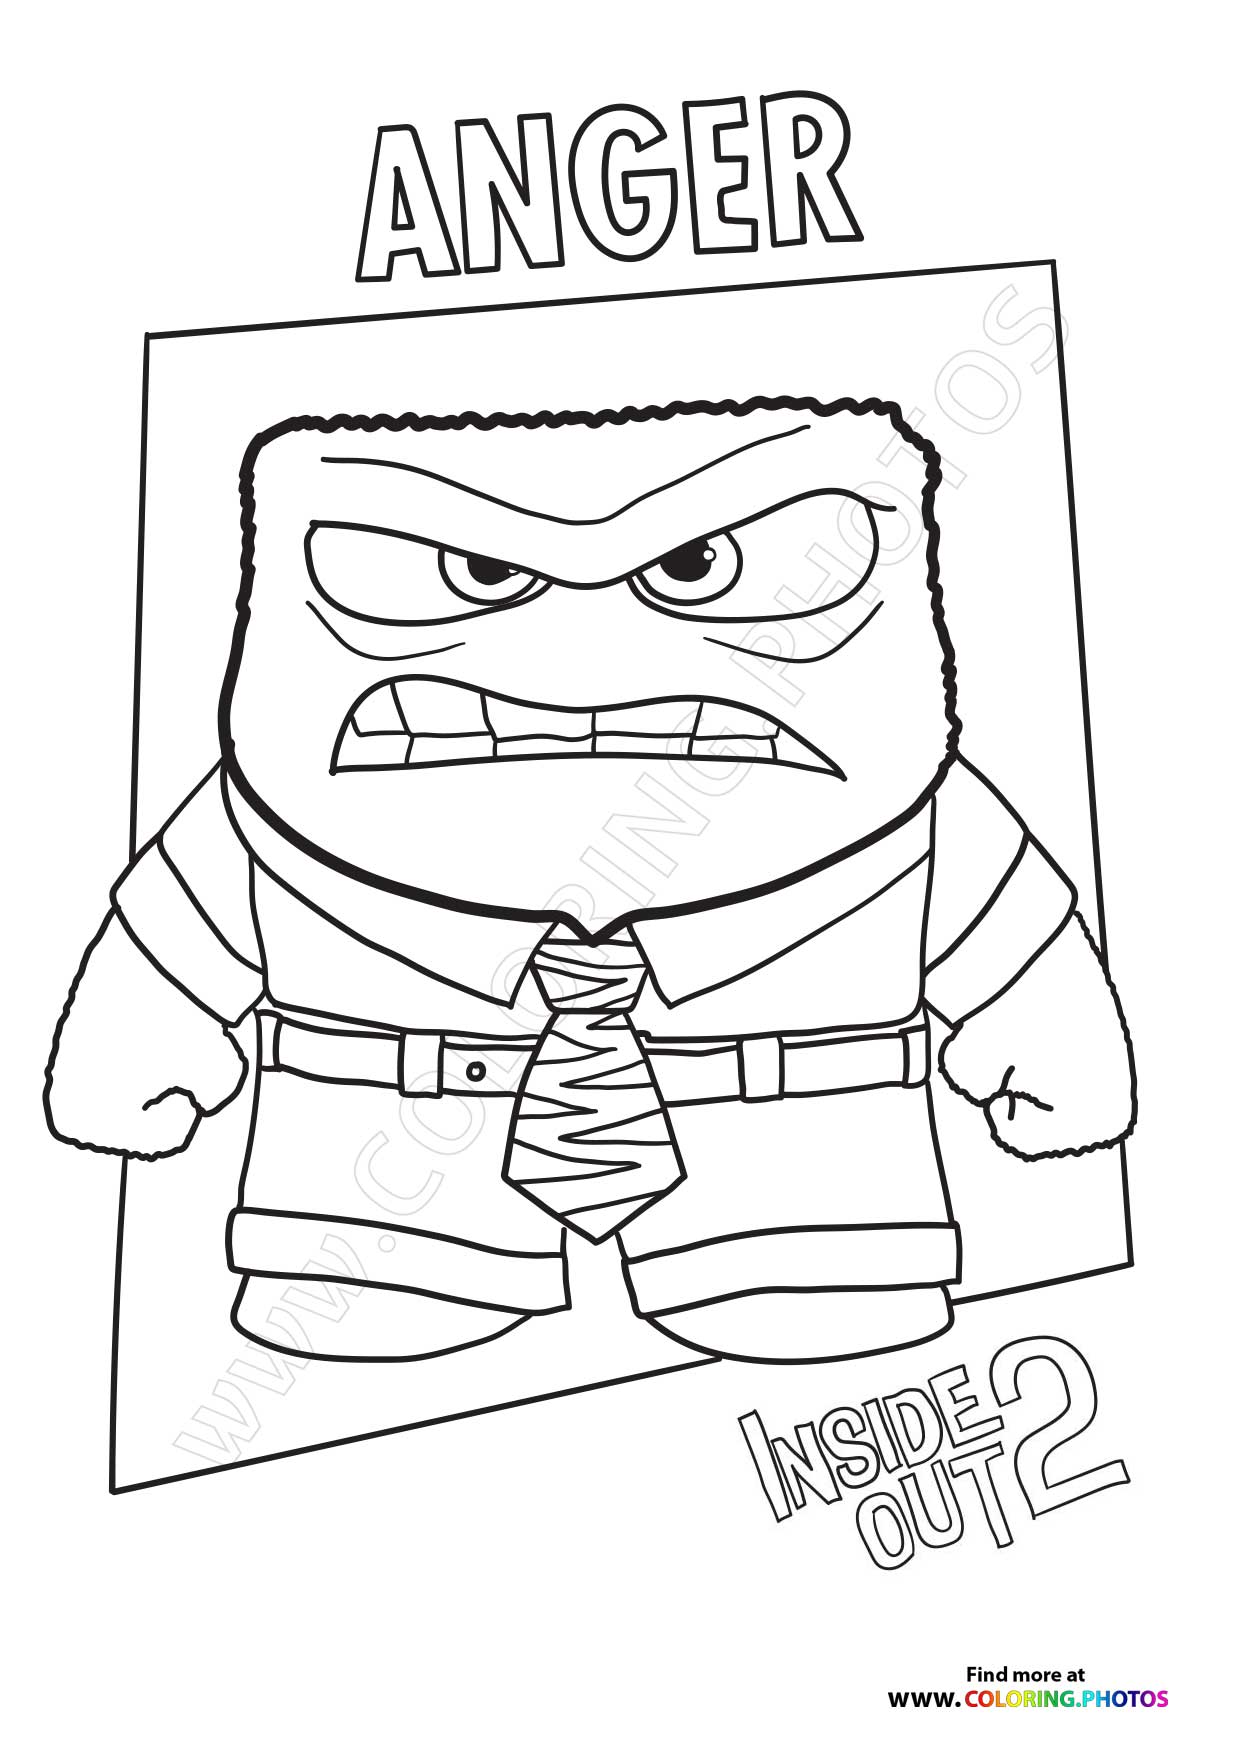 Anger Inside Out 2 - Coloring Pages for ...